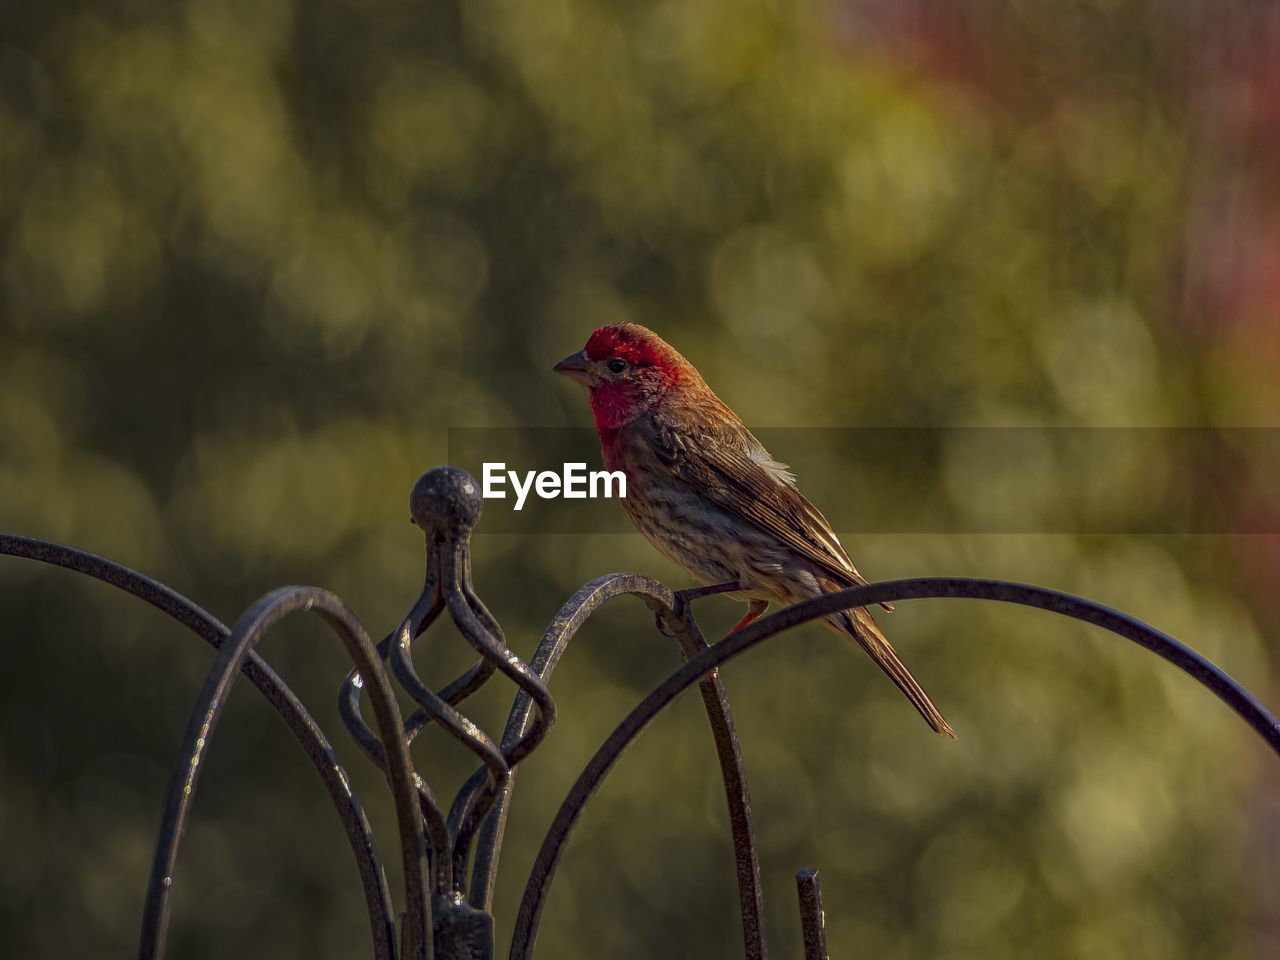 bird, animal themes, animal, nature, animal wildlife, branch, close-up, wildlife, perching, focus on foreground, beak, no people, macro photography, one animal, outdoors, flower, house finch, songbird, day, red